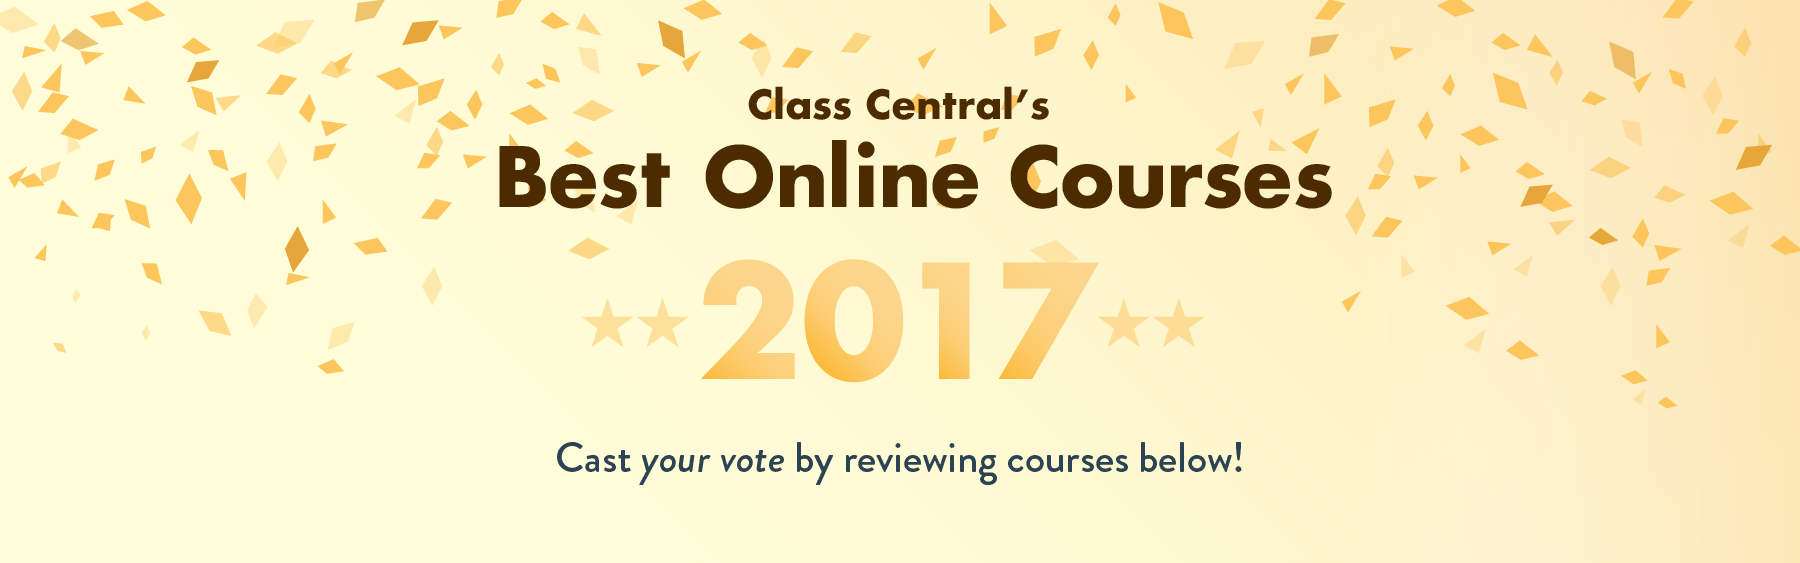 Class Central's Best New Online Courses for 2017 — Cast your vote!